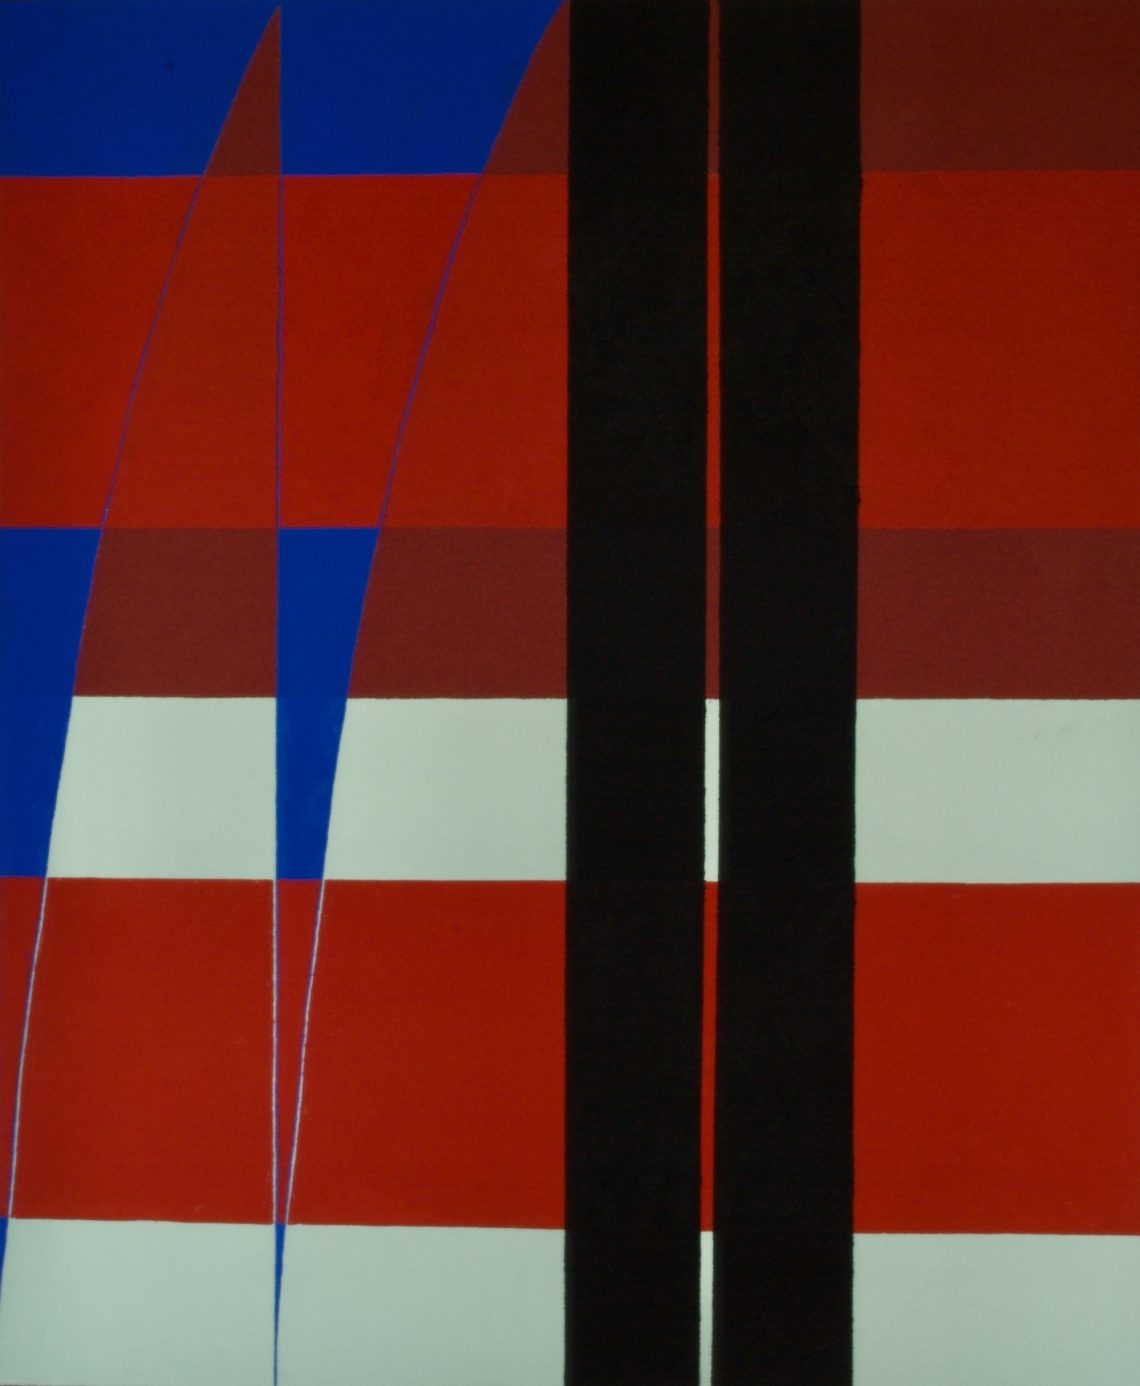 Image shows a red, black, blue and cream asbstract painting